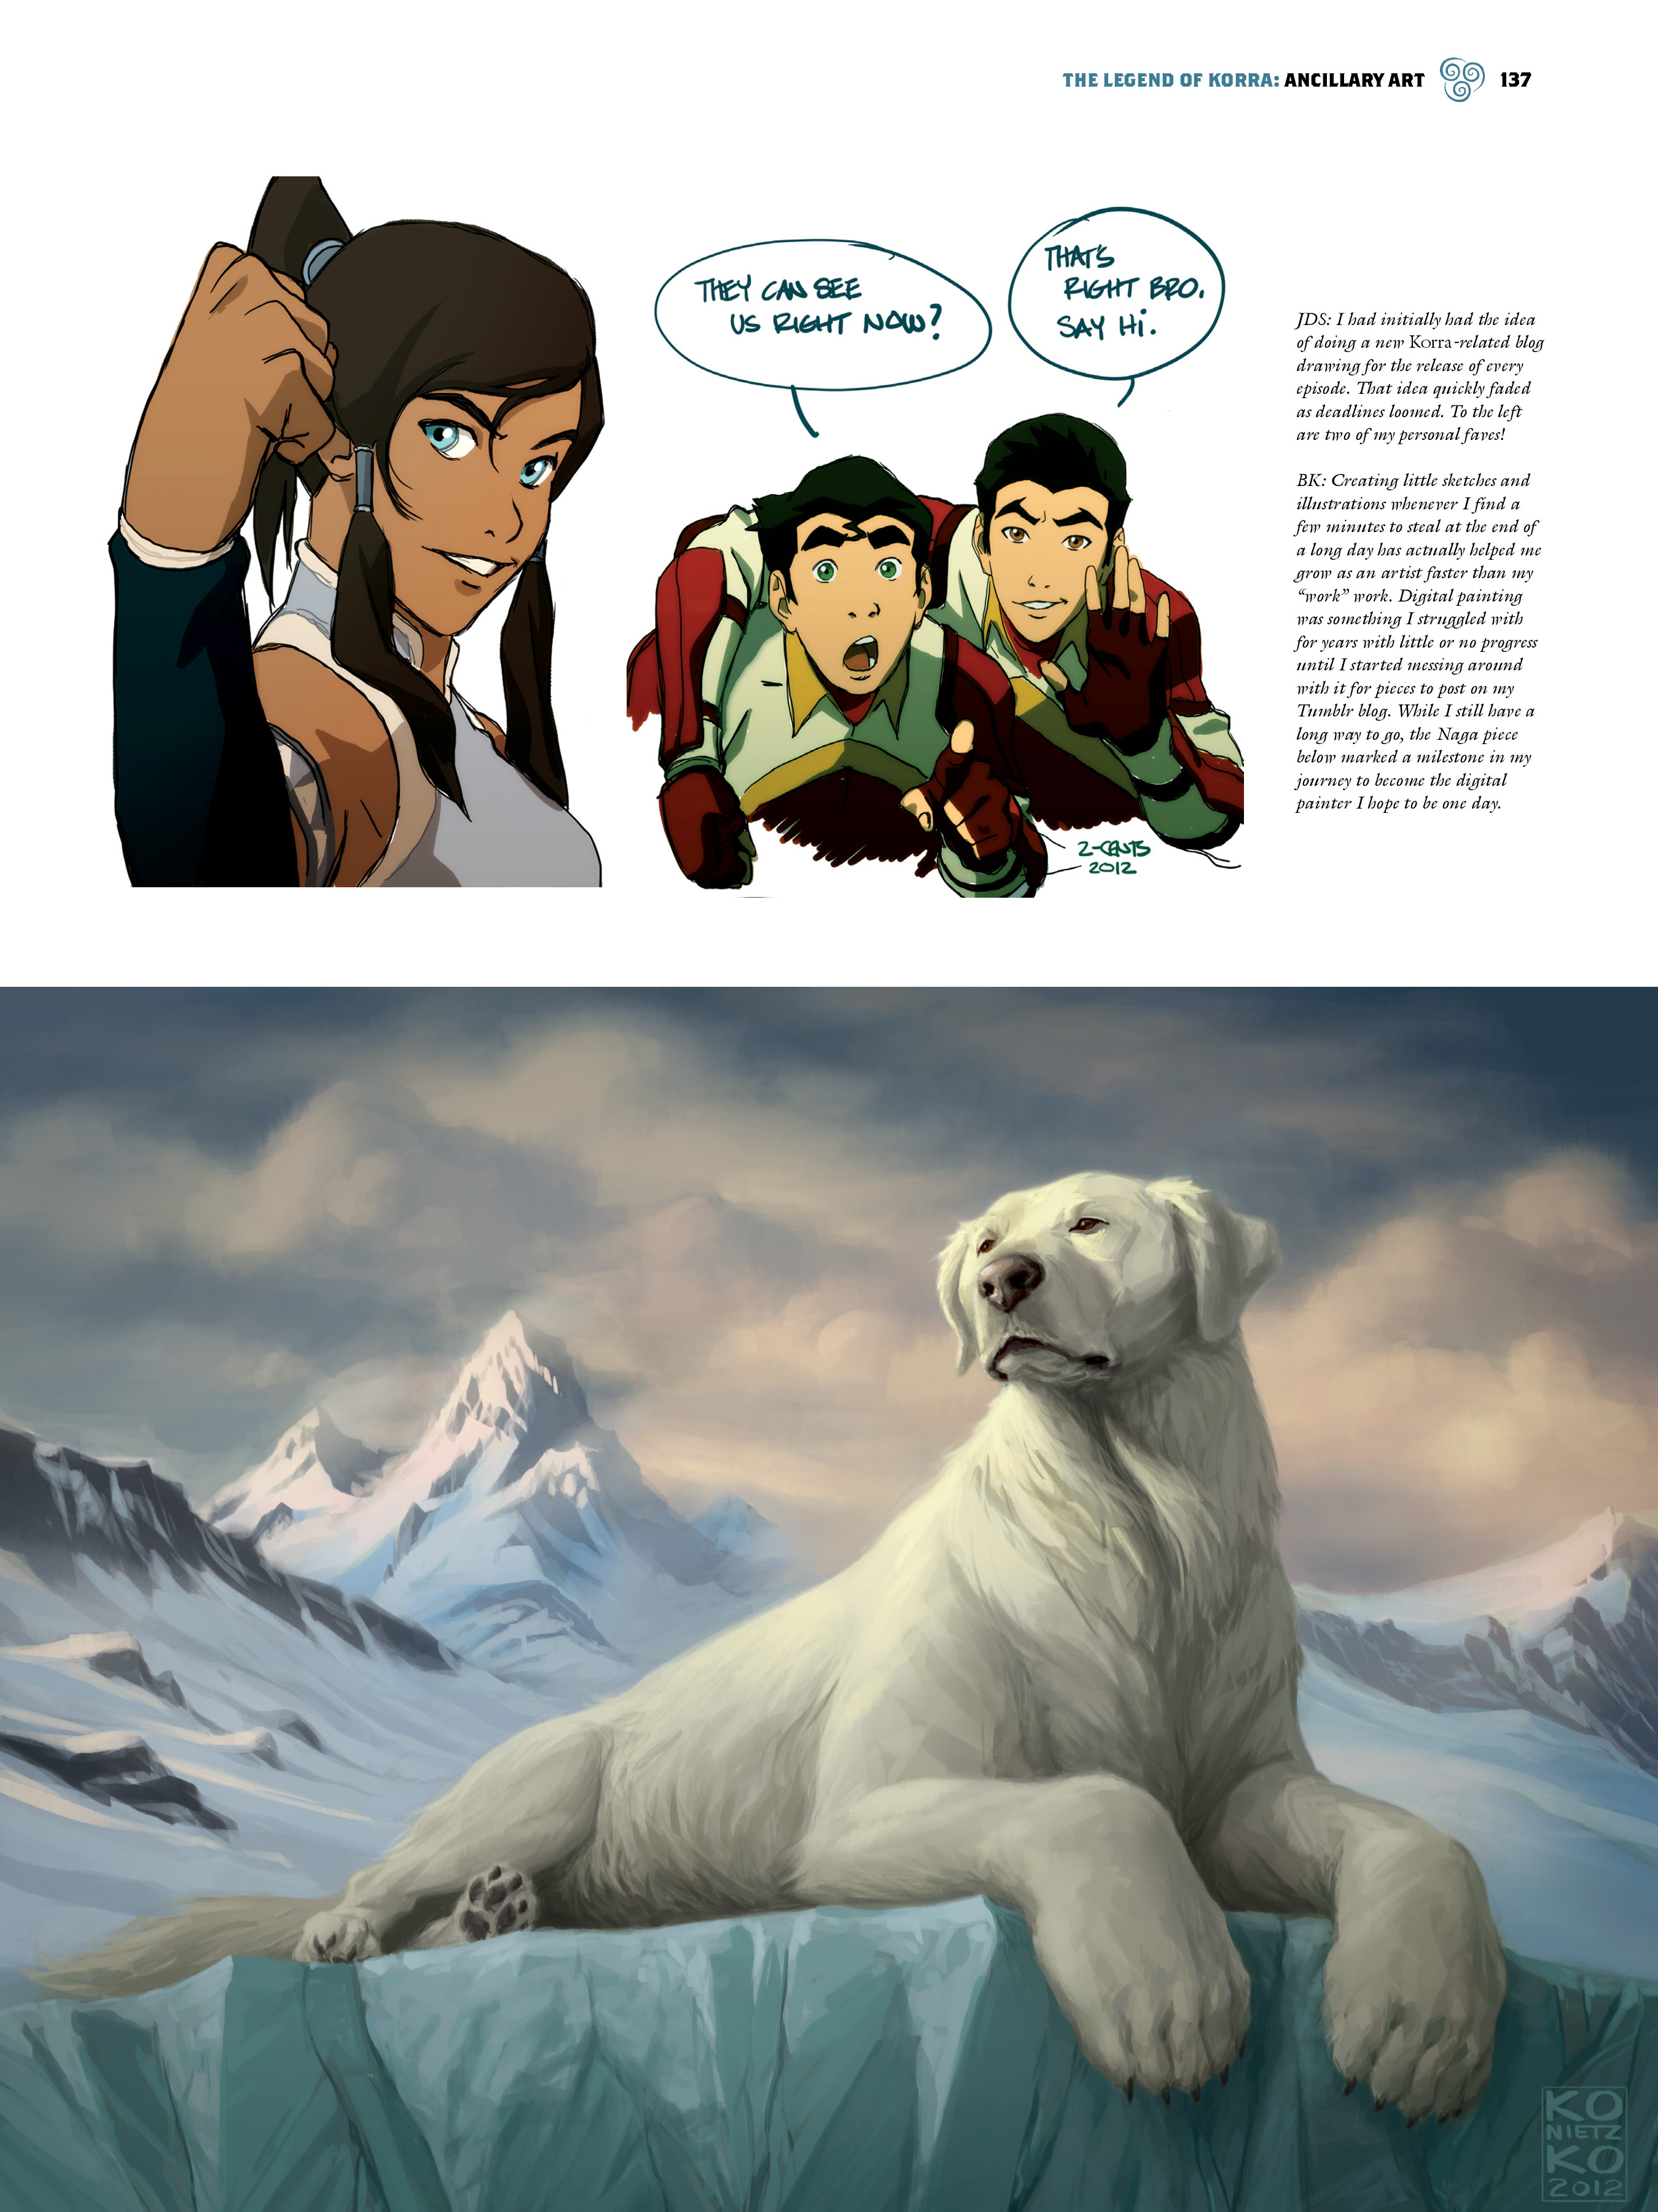 Read online The Legend of Korra: The Art of the Animated Series comic -  Issue # TPB 1 - 122